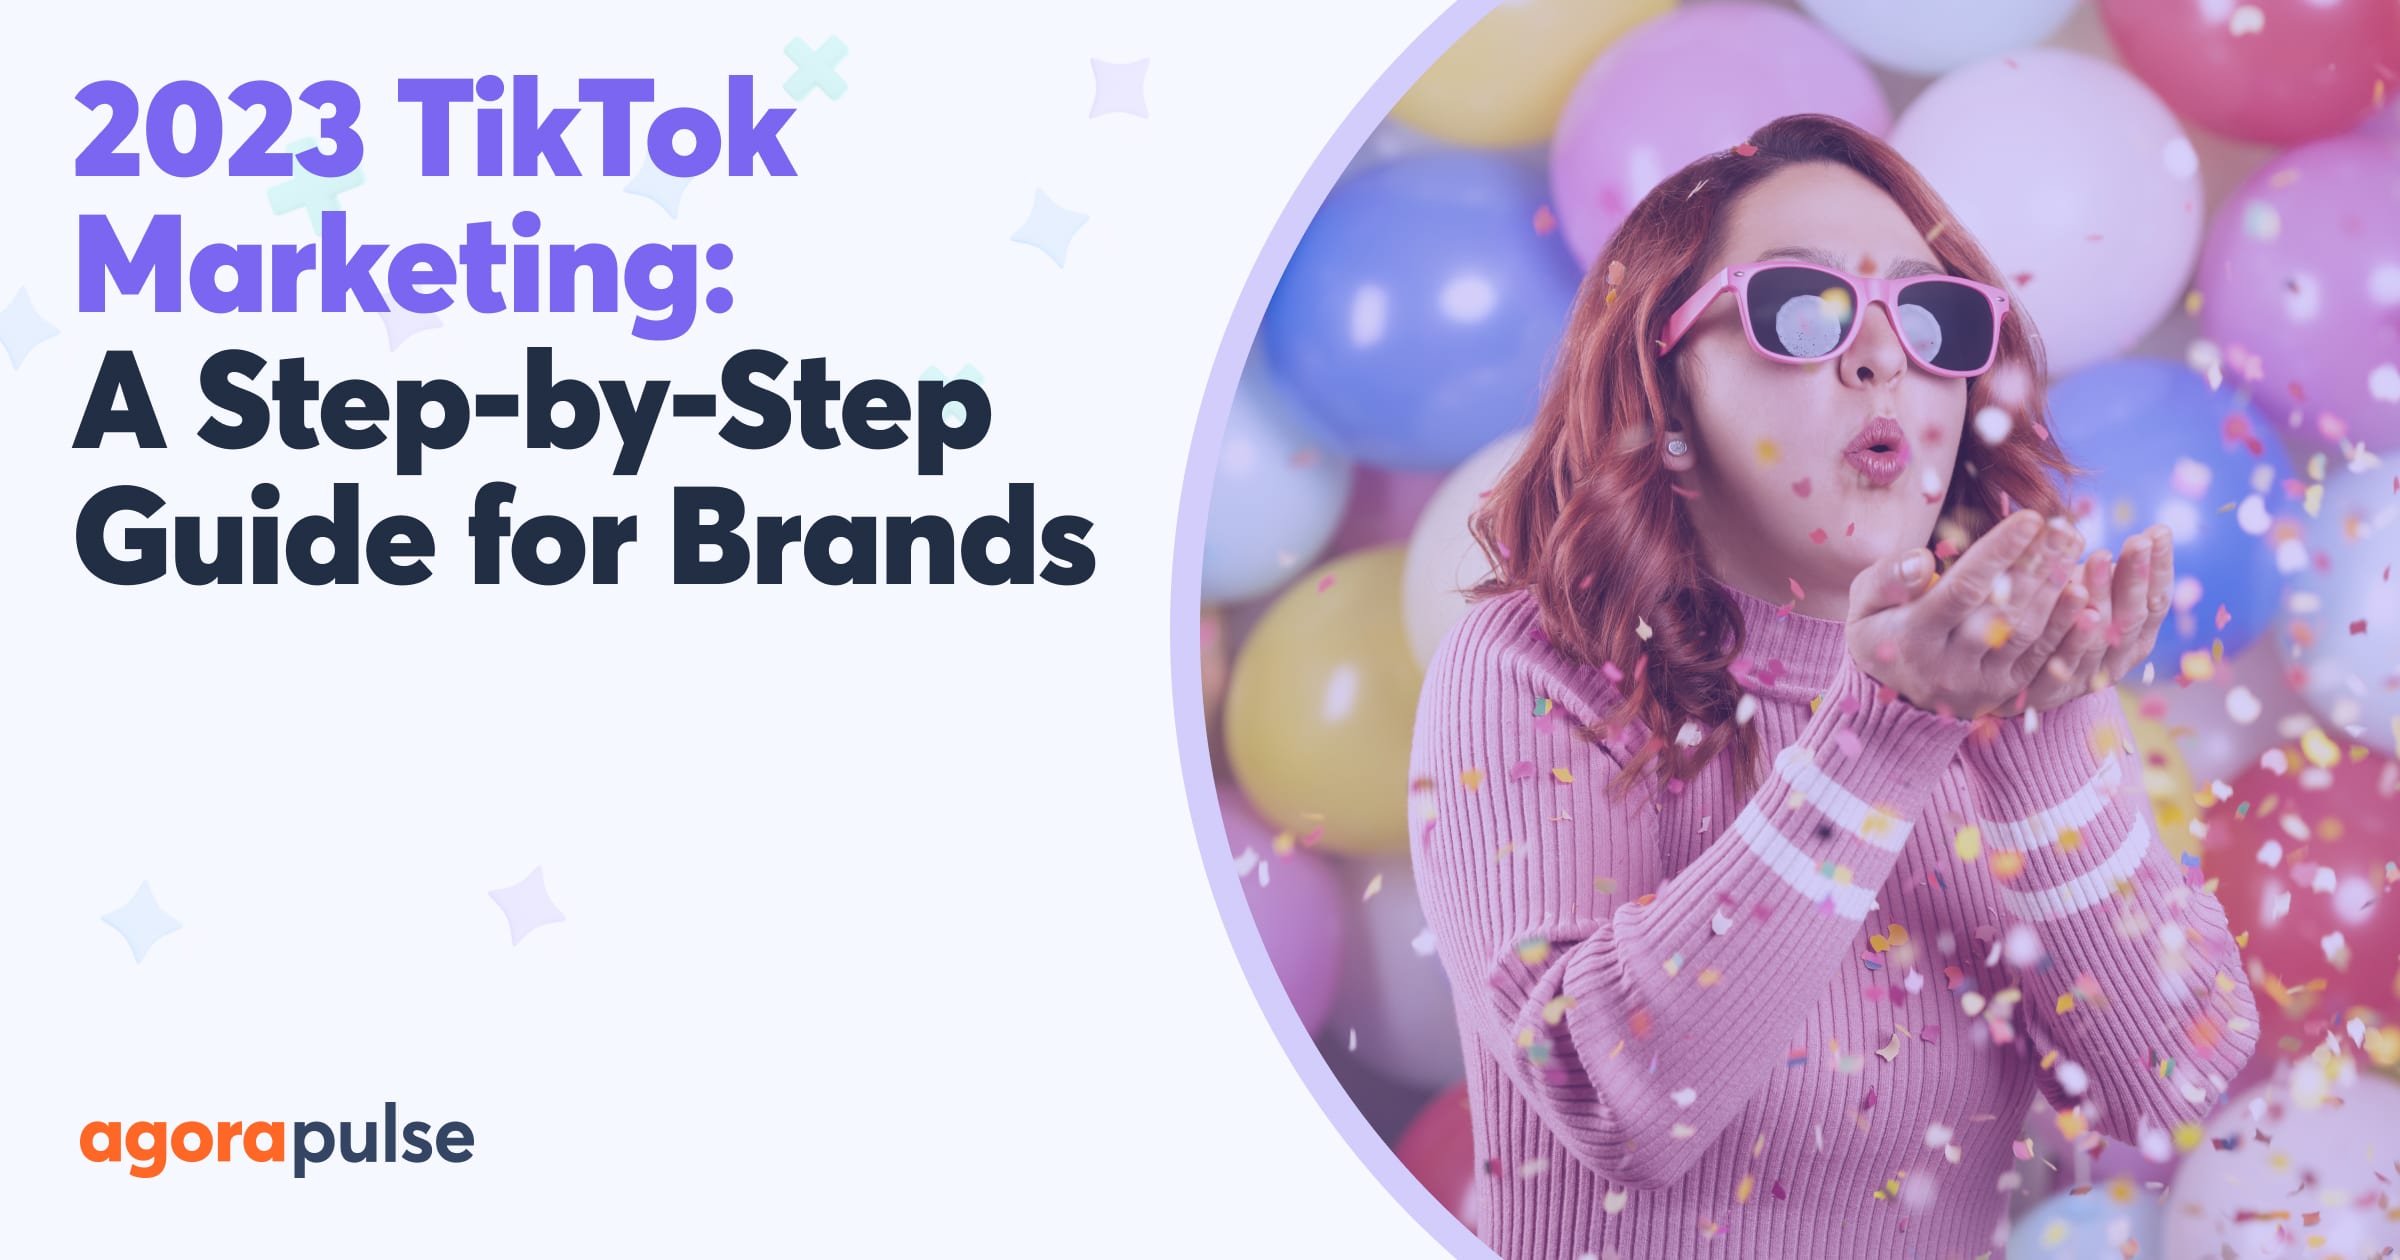 How To Repost On Tiktok: A Step-By-Step Guide for 2024